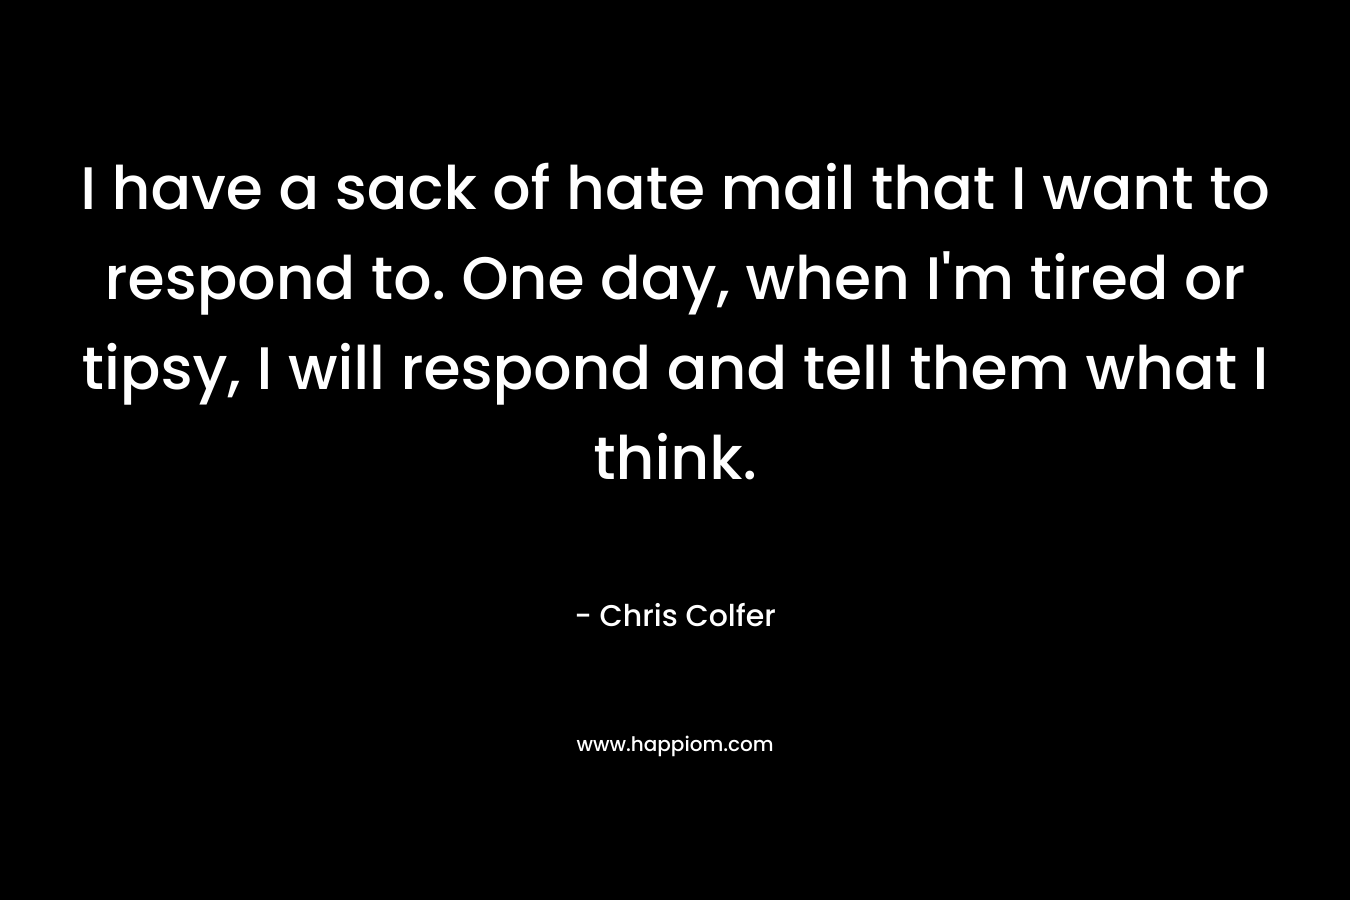 I have a sack of hate mail that I want to respond to. One day, when I'm tired or tipsy, I will respond and tell them what I think.